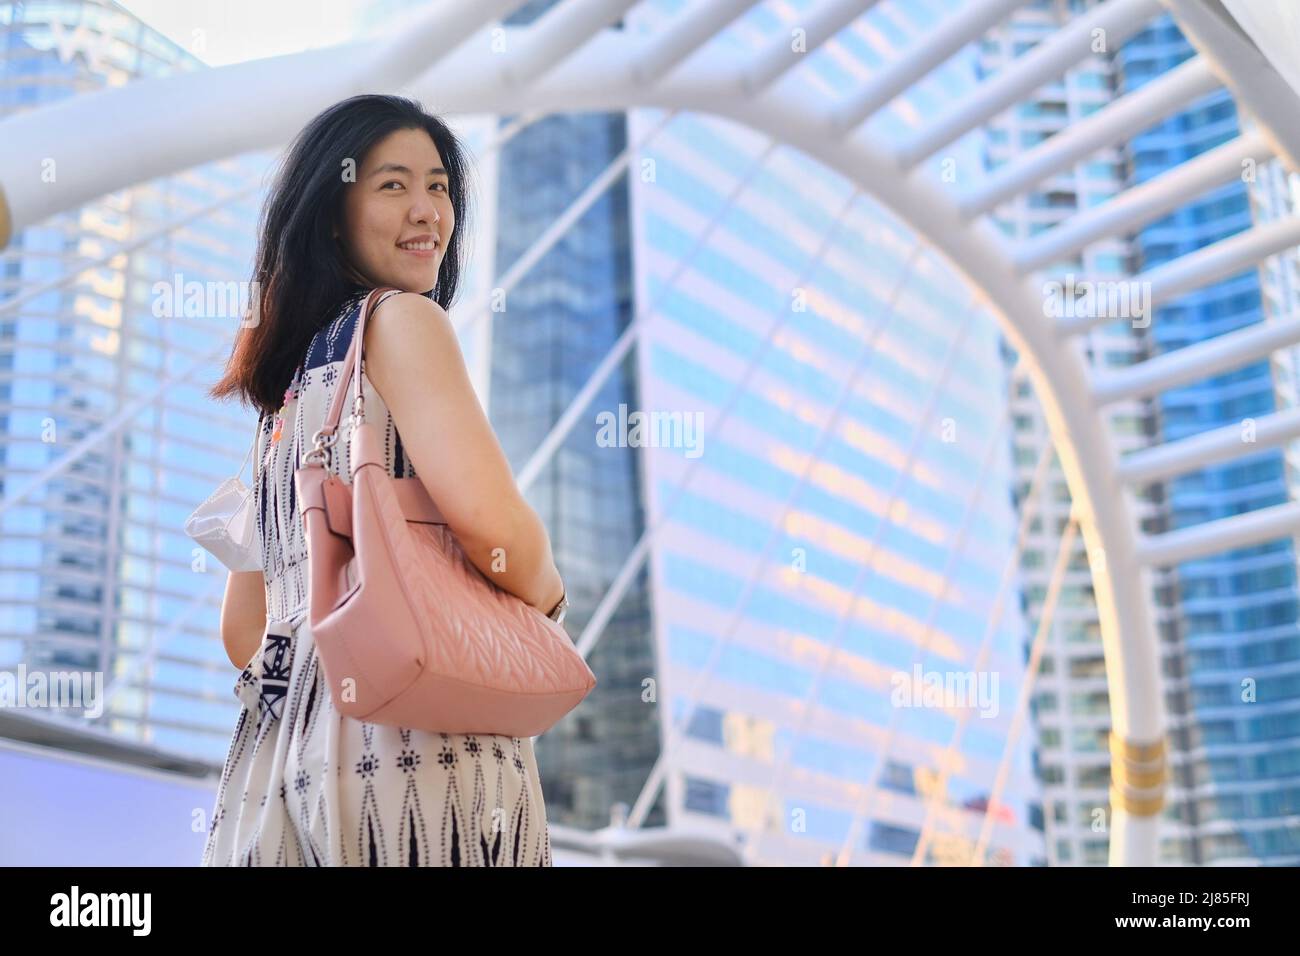 The back view of a young business woman walking on an intersection overpass in downtown Bangkok with high-rise office buildings in the background. Stock Photo